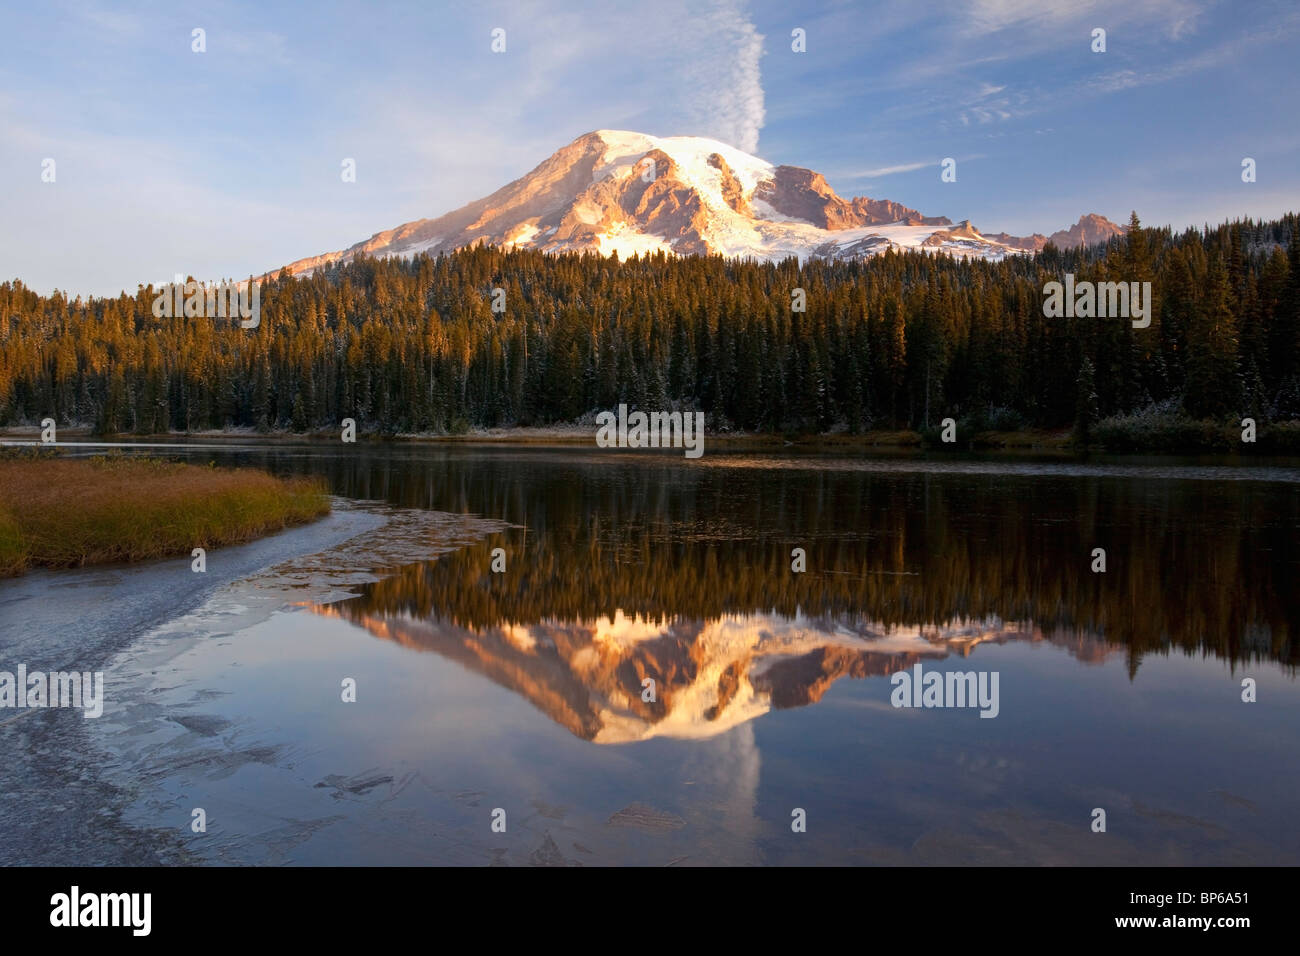 Washington, United States Of America; Reflection Of Mount Rainier In A Lake With Ice On The Surface In Mt. Rainier National Park Stock Photo